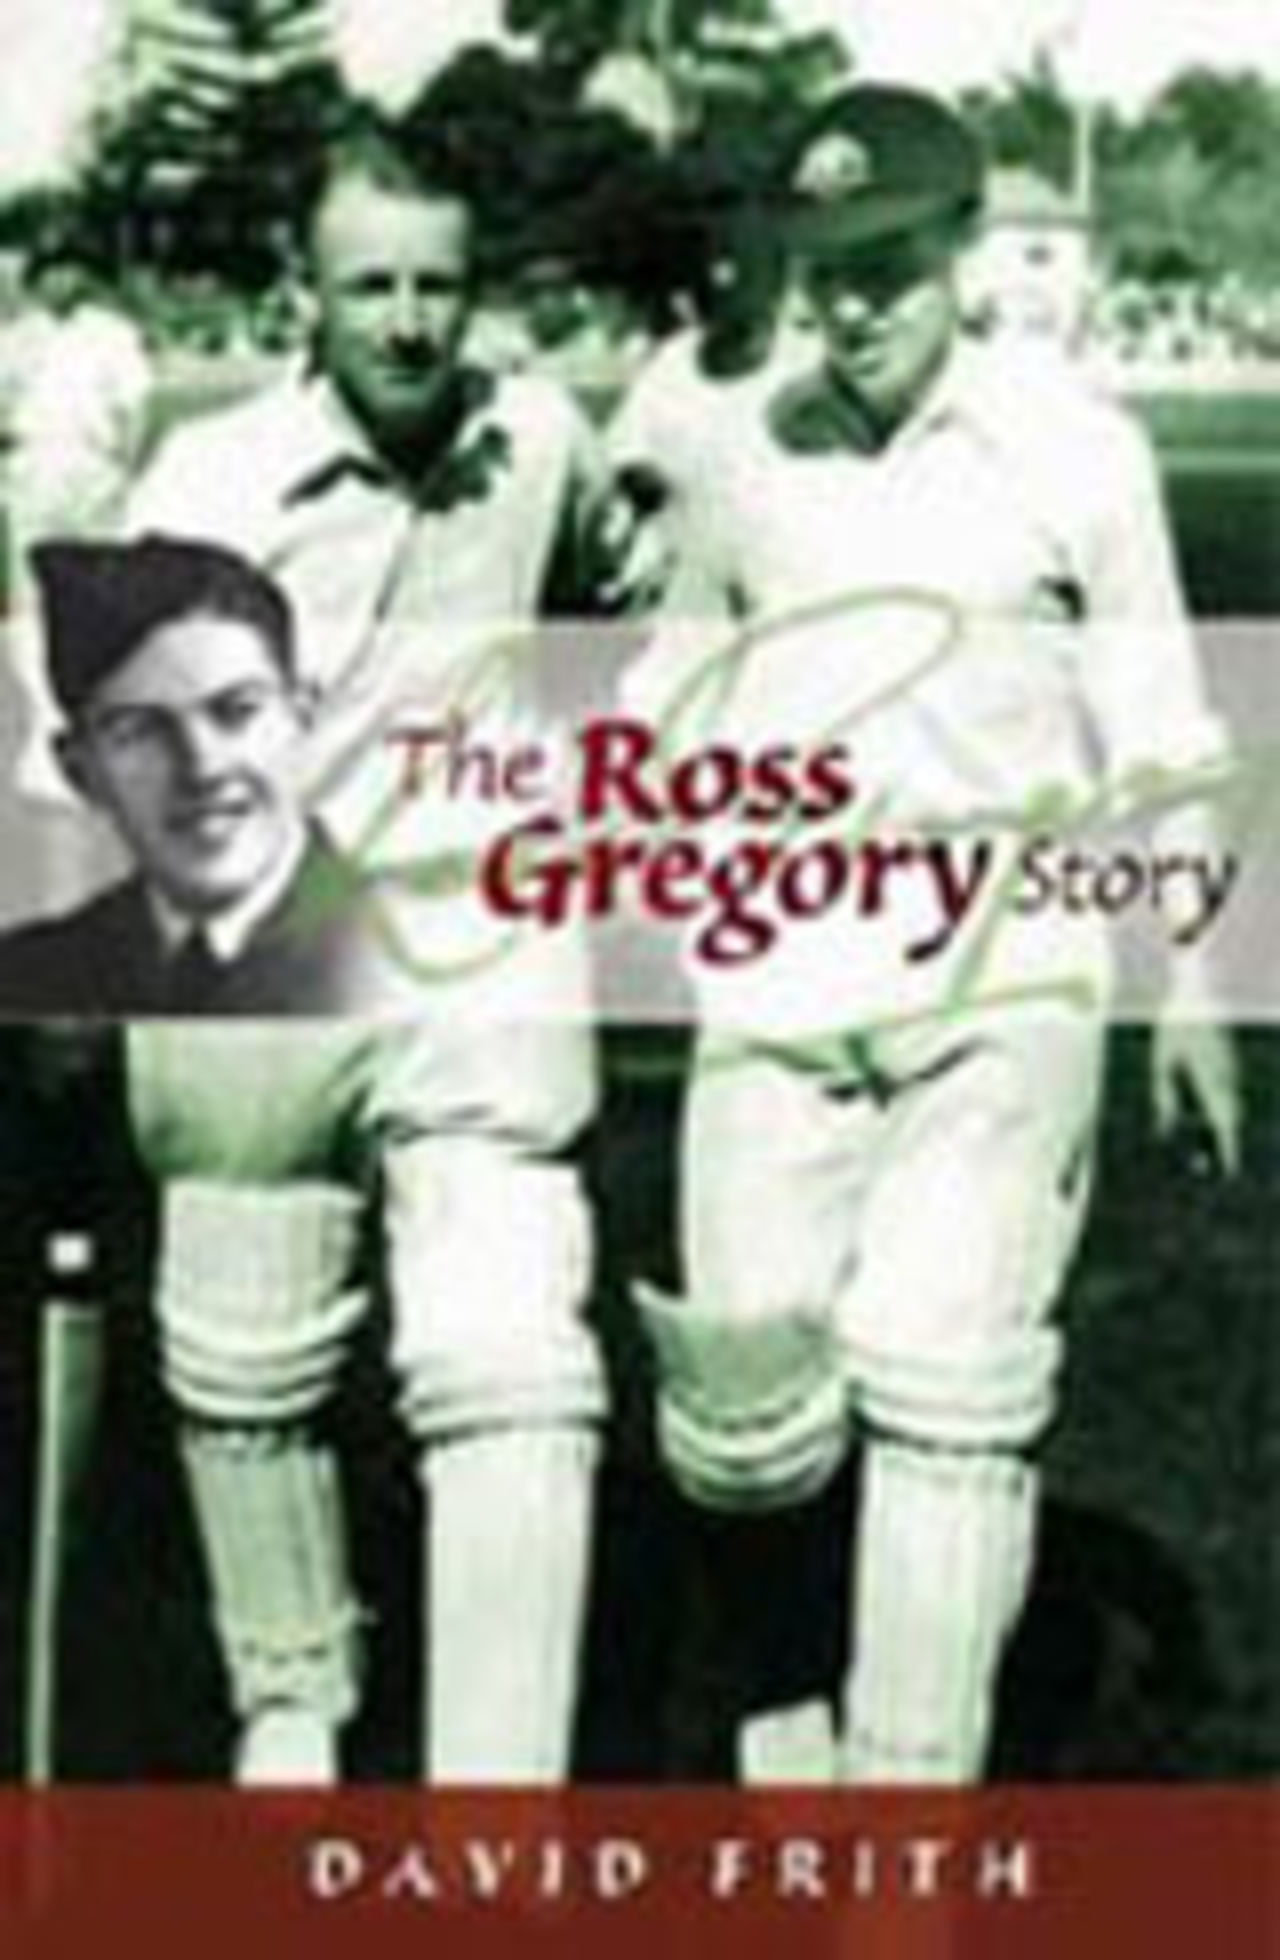 The Ross Gregory Story - David Frith